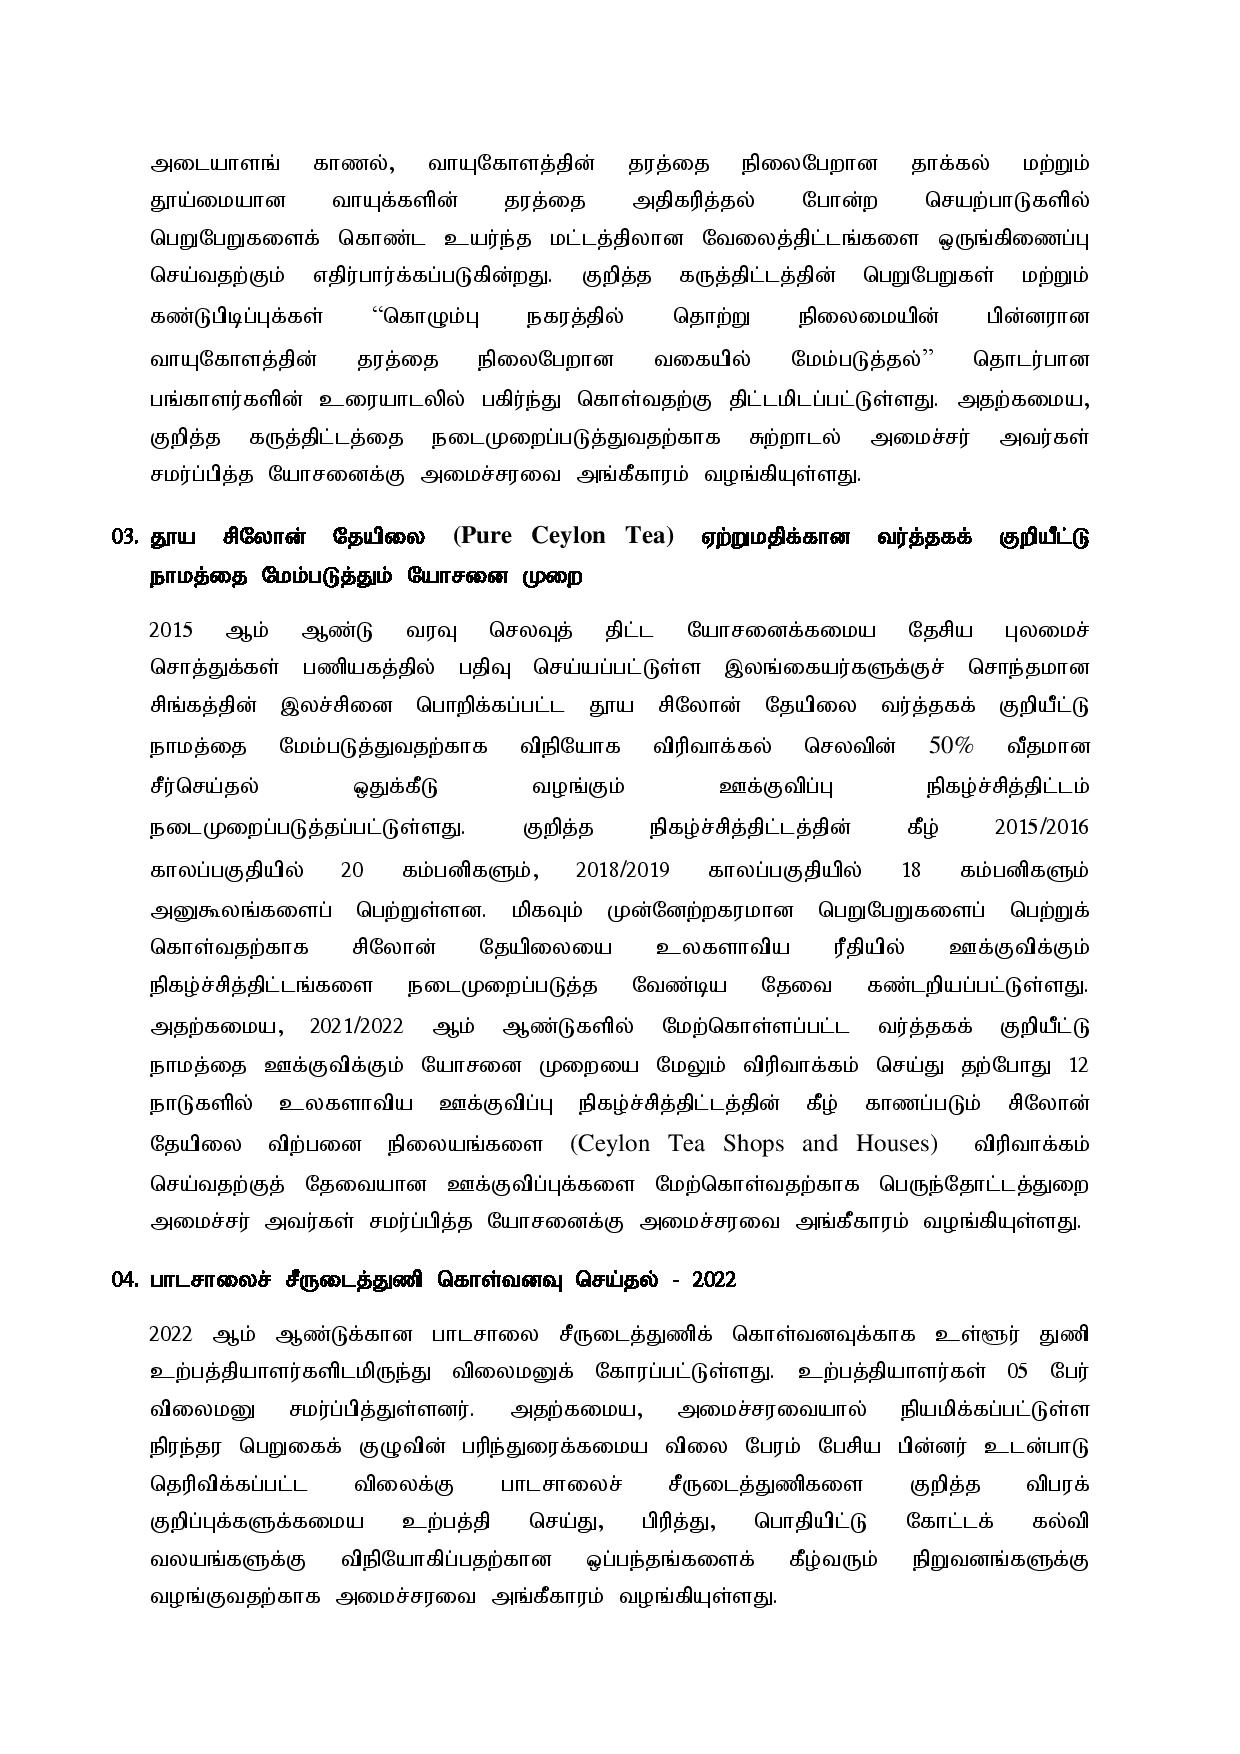 Cabinet Decision on 17.08.2021 Tamil page 002